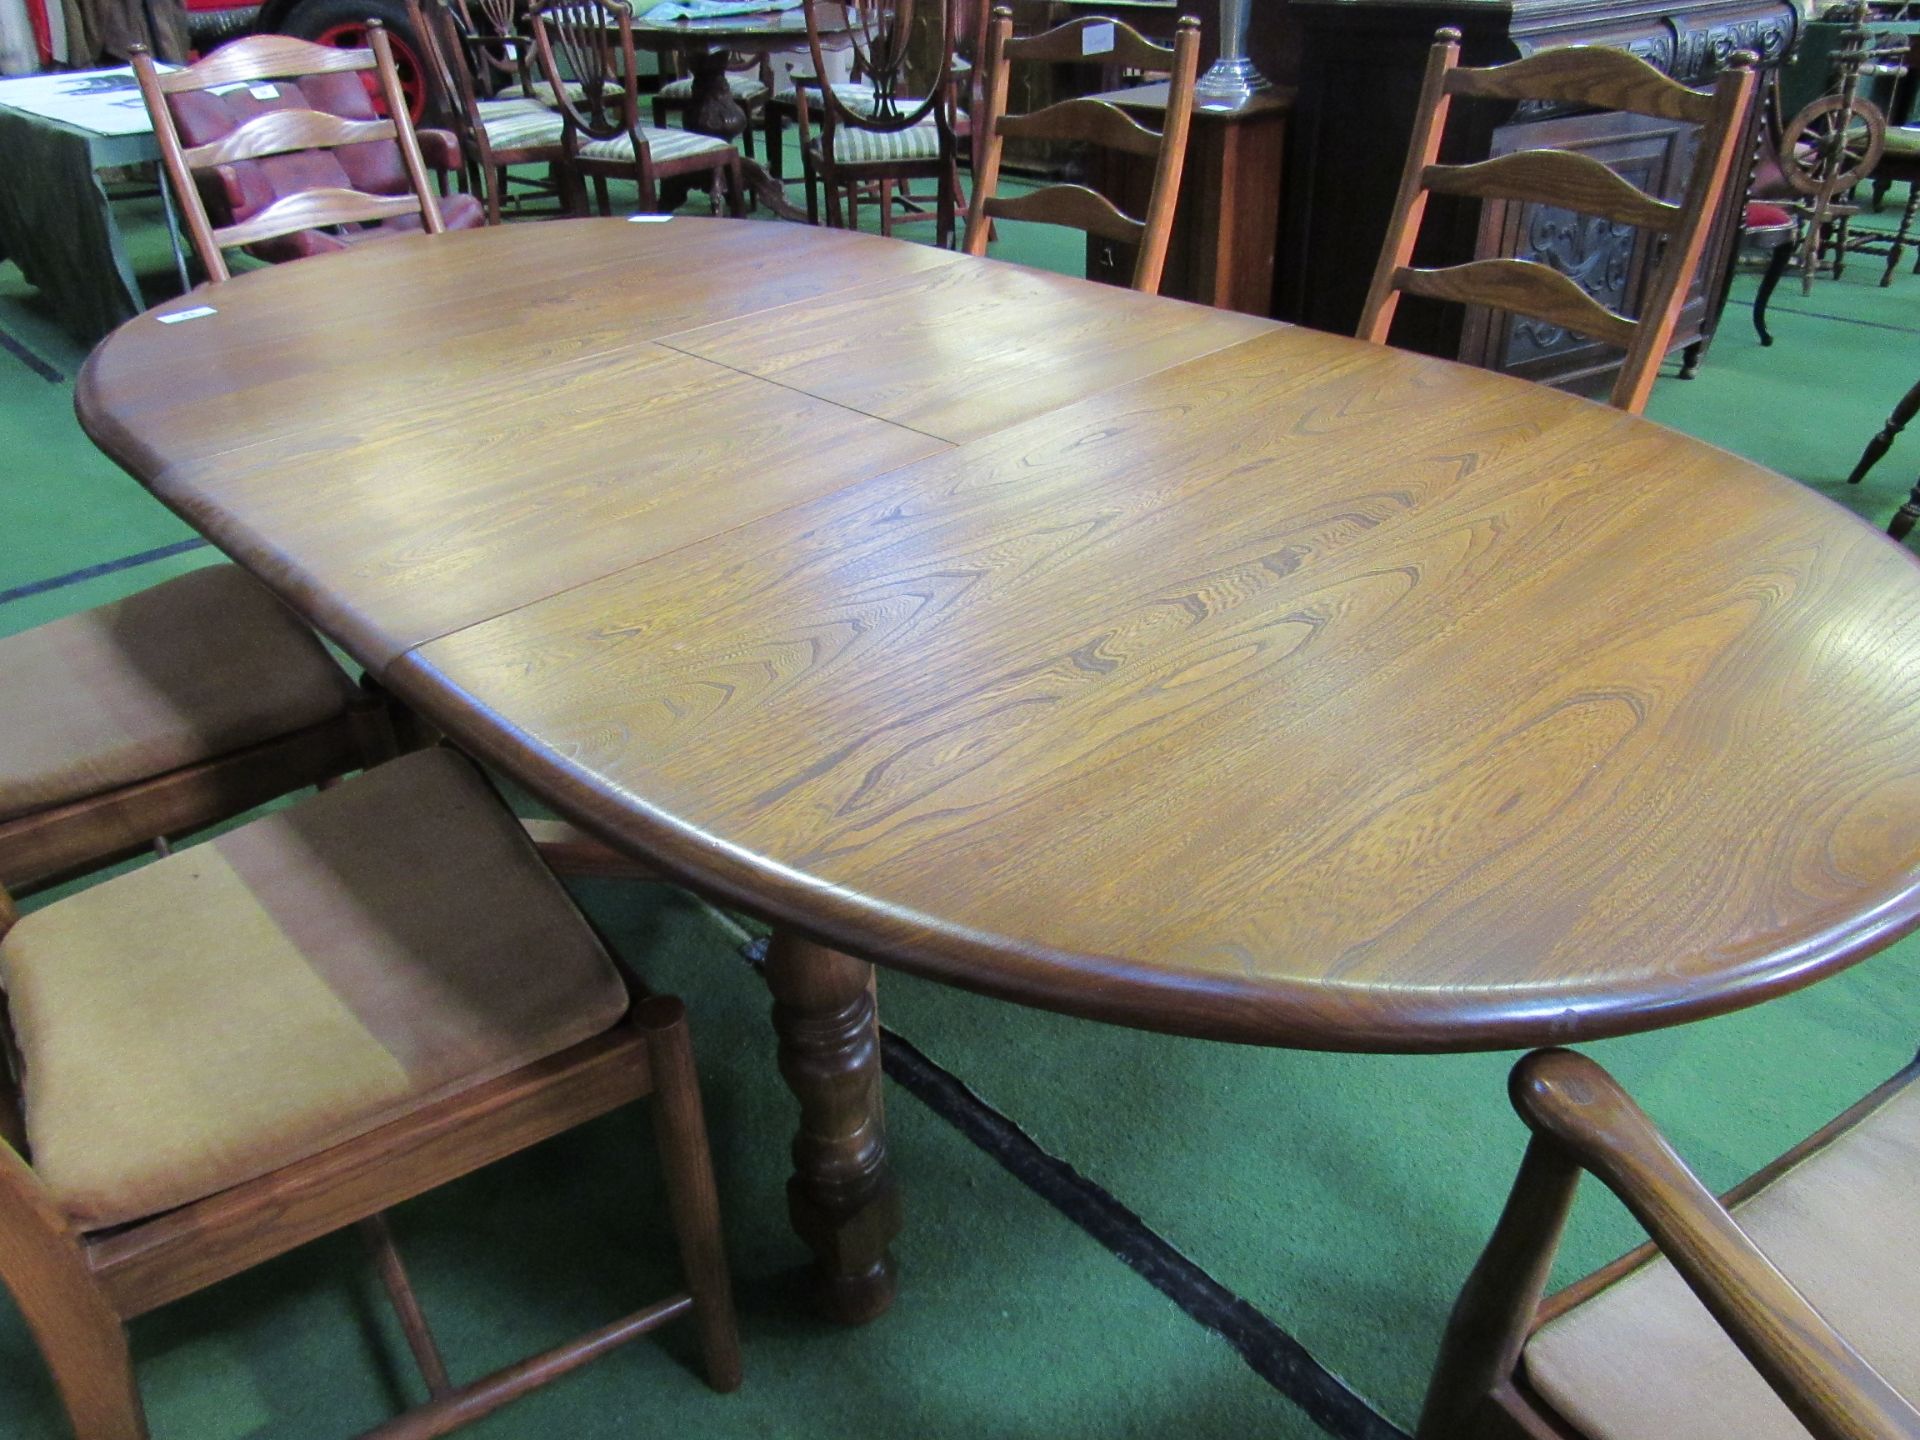 Ercol extending dining table, 212 x 108cms. Estimate £100-150. - Image 4 of 5